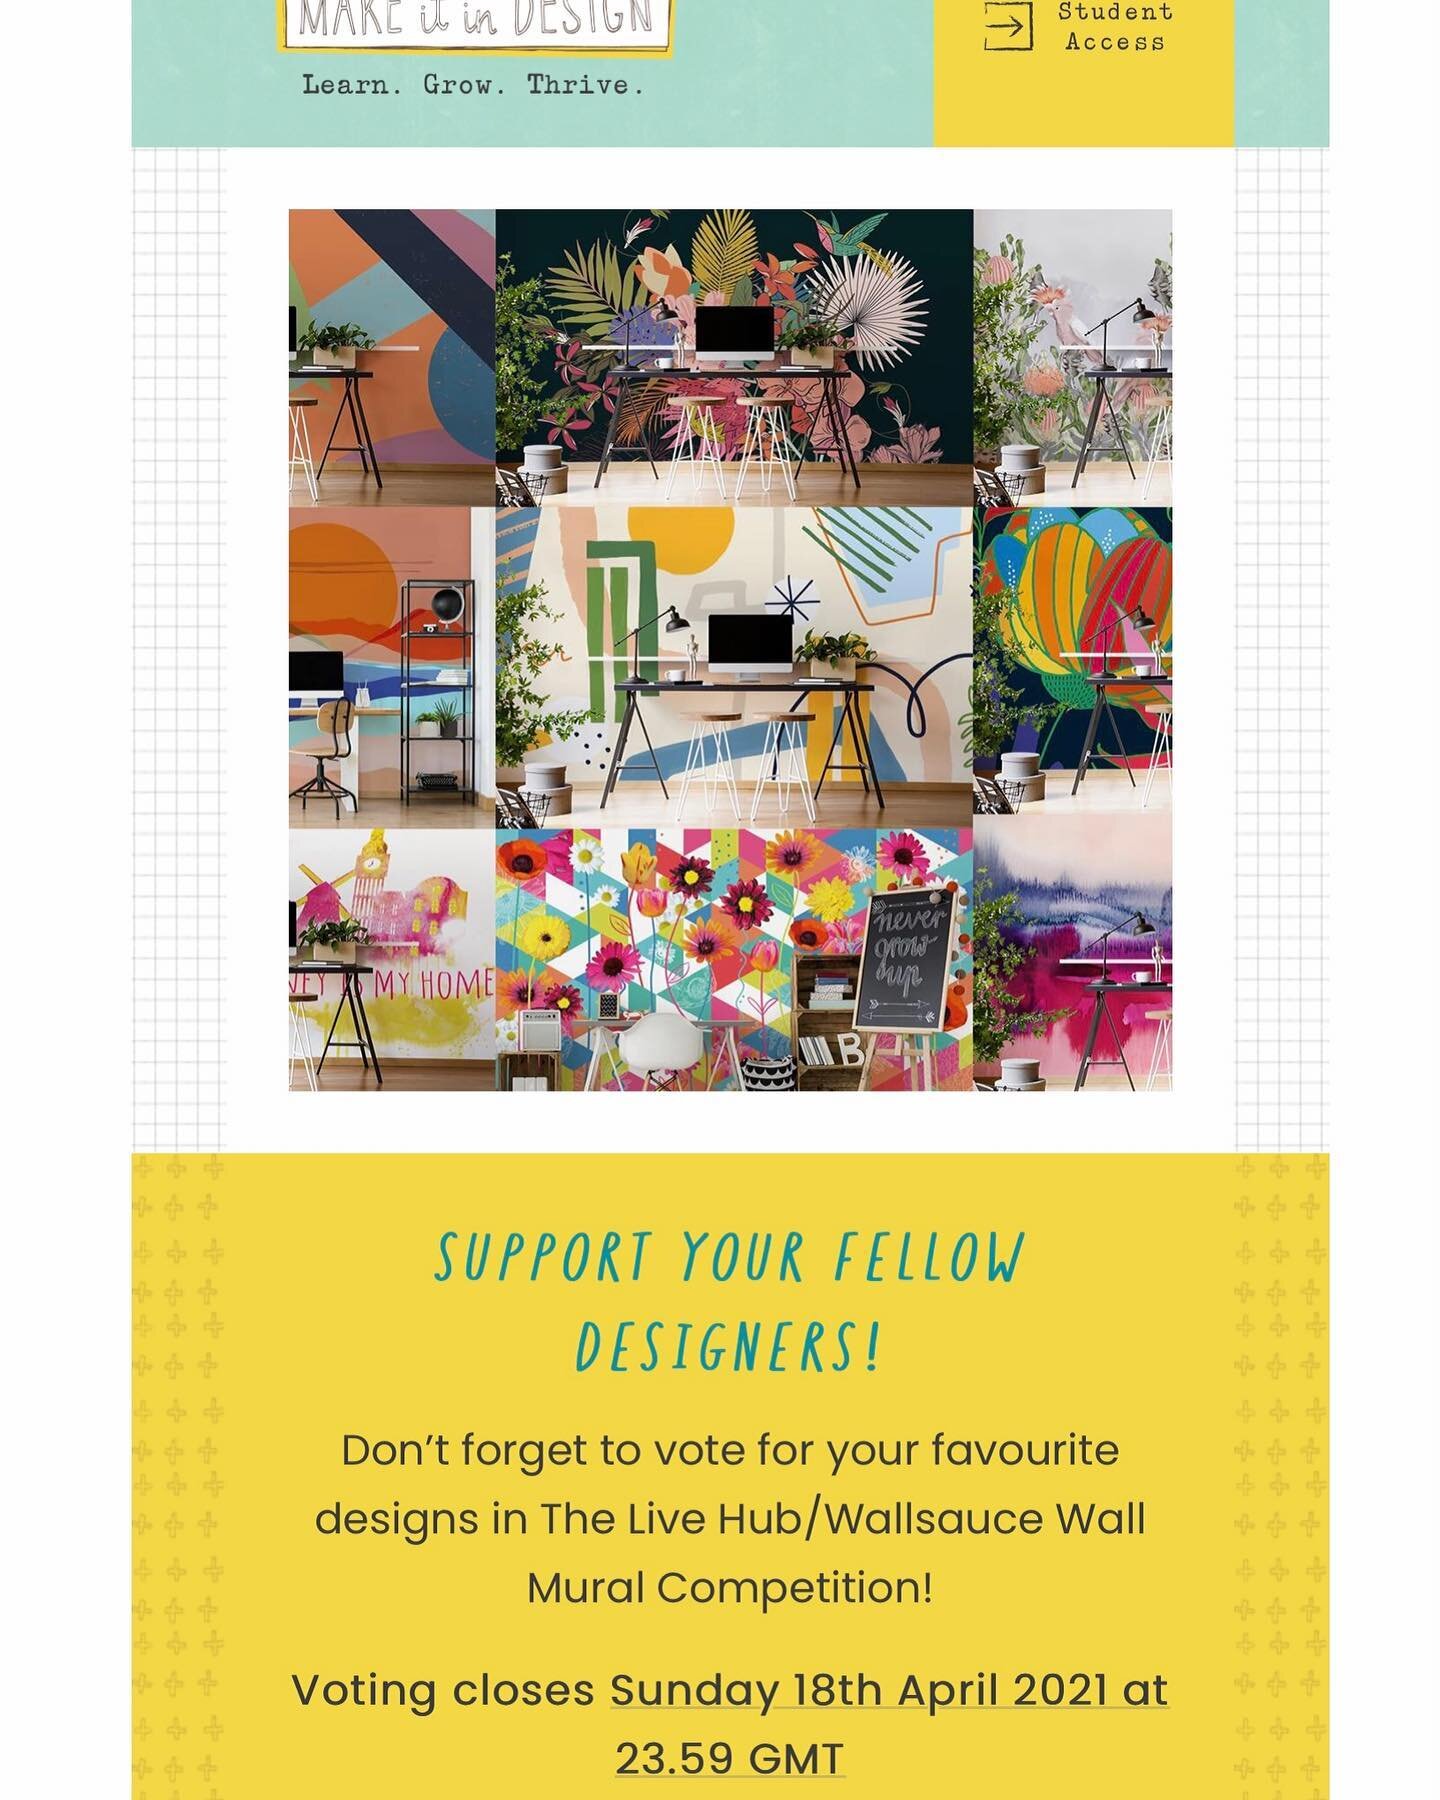 Last chance to vote folks! Please support your fellow designers and cast your vote in the @makeitindesign @wallsaucecom competition!Closing date is Sunday 18th April. Link in bio. Thank you everyone! 🙏😍 #designcompetition #designinspiration #makeit